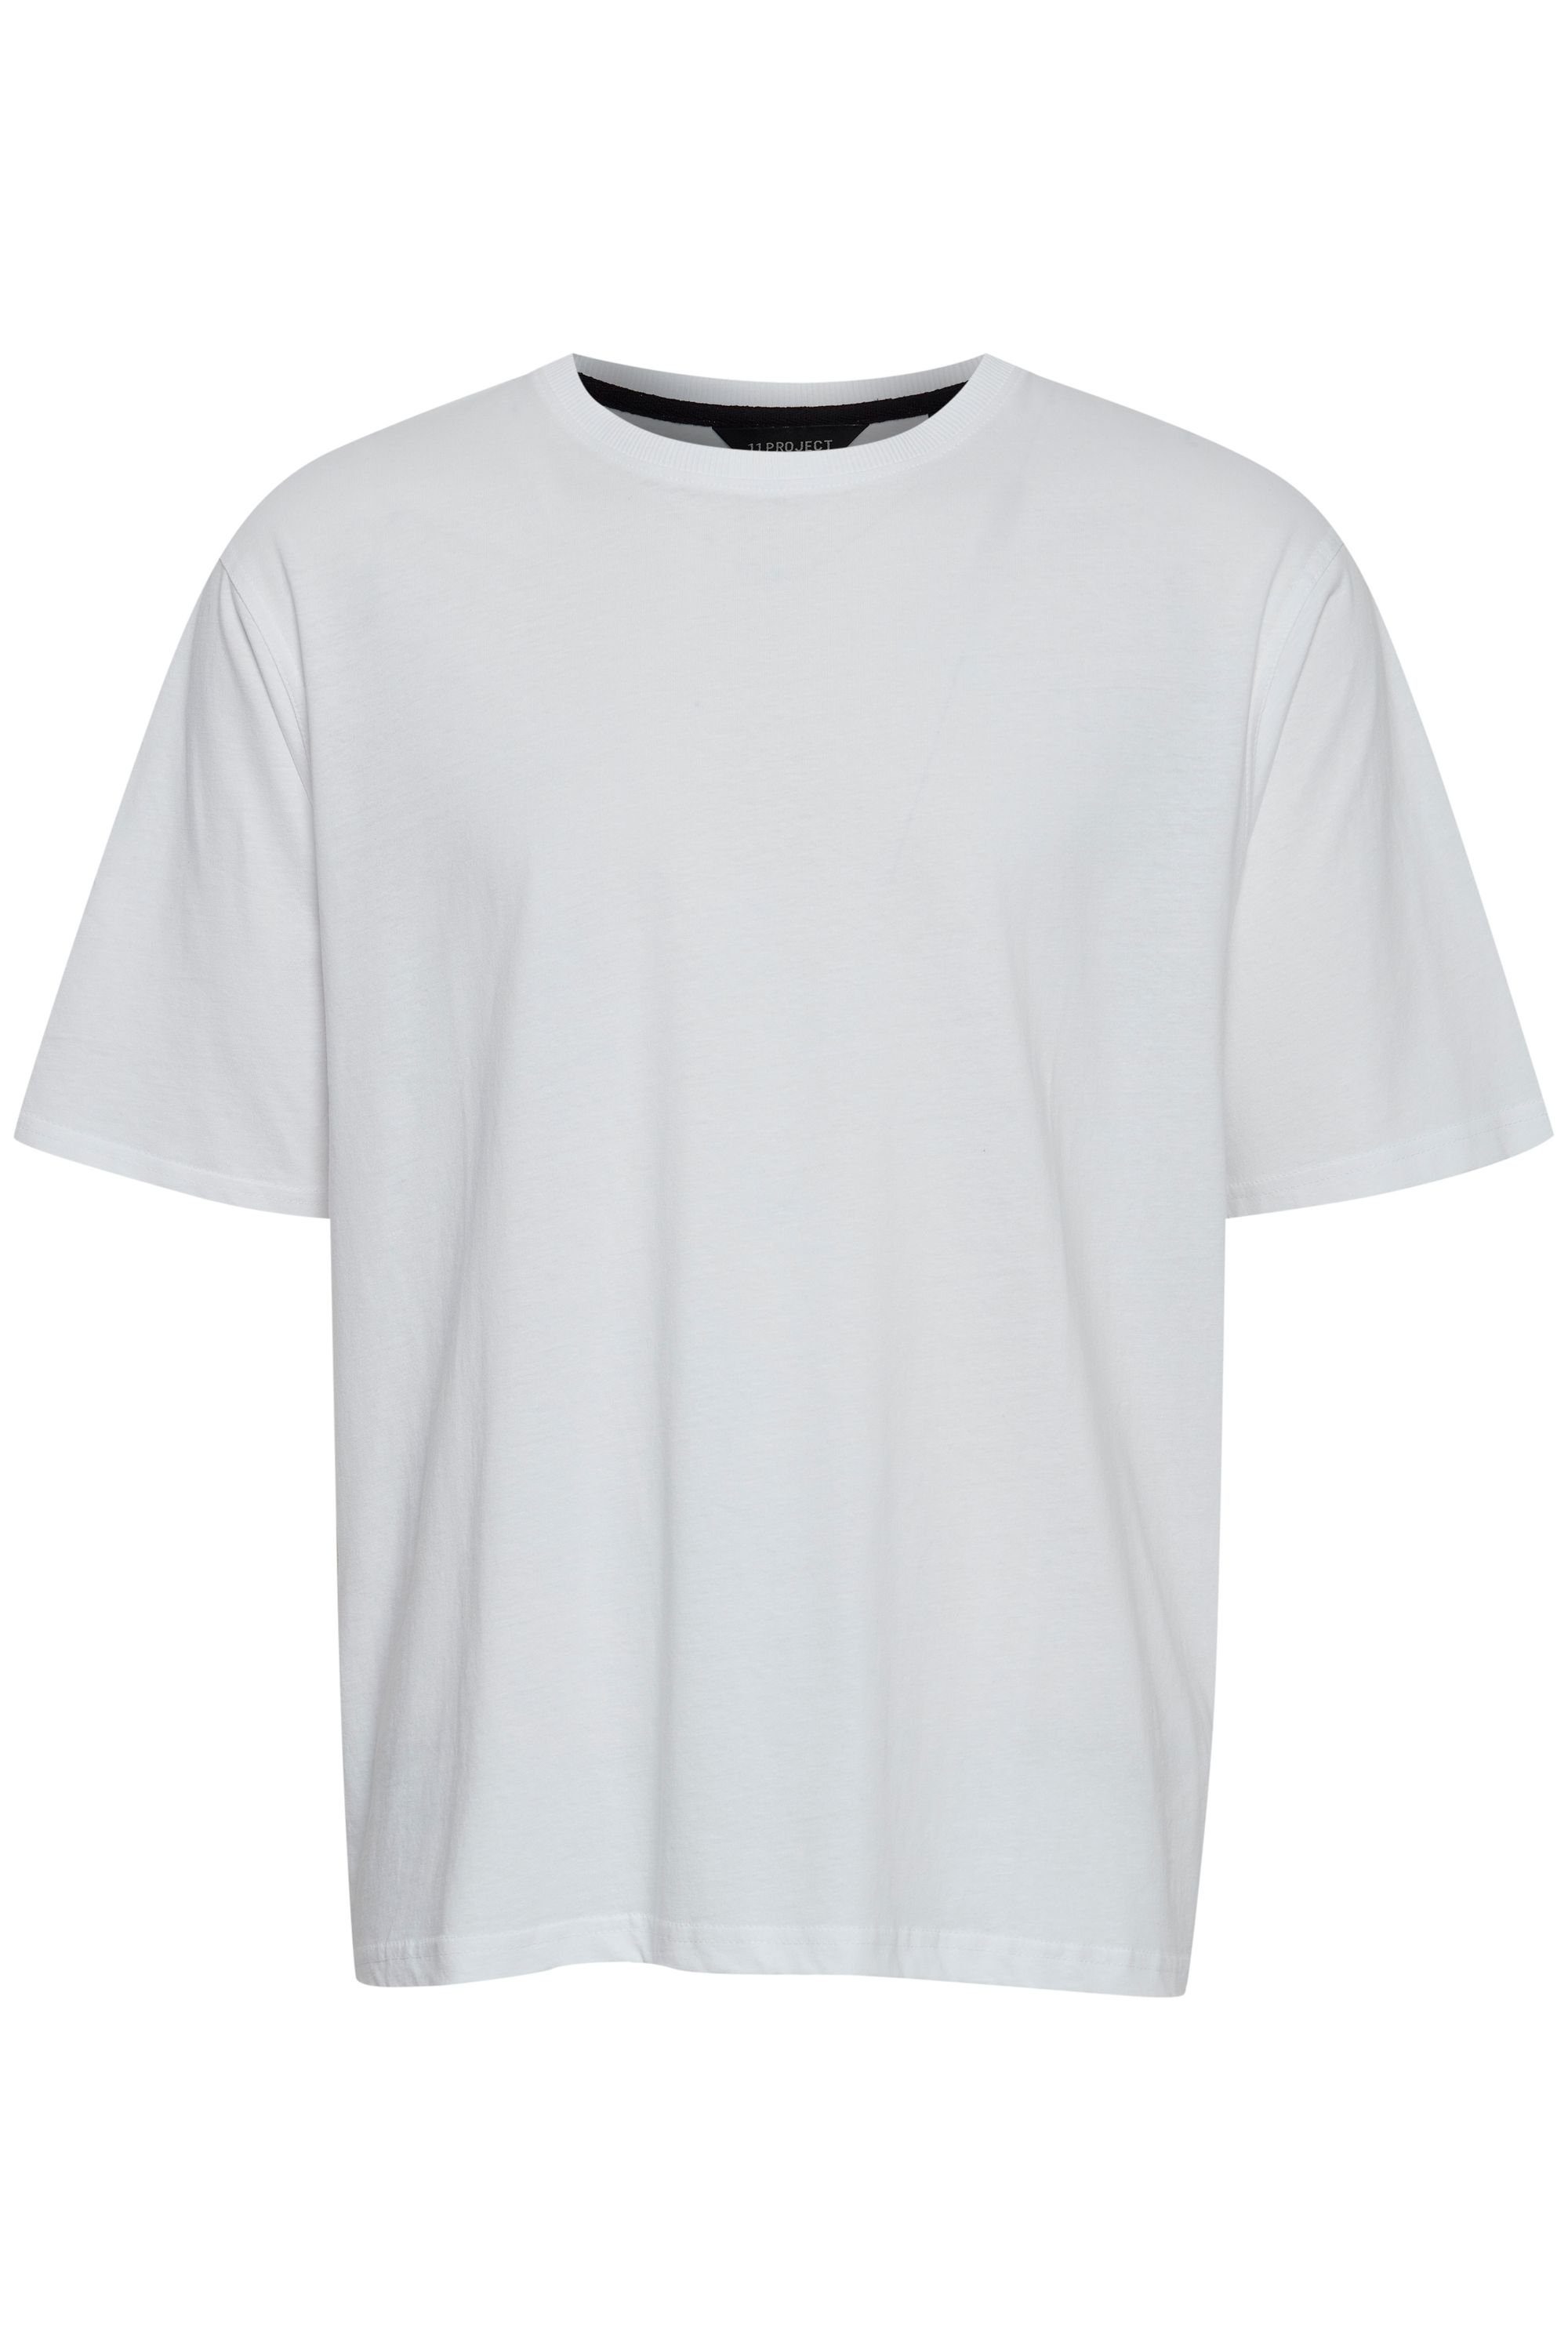 PRBriggs 11 Project Project 11 White T-Shirt